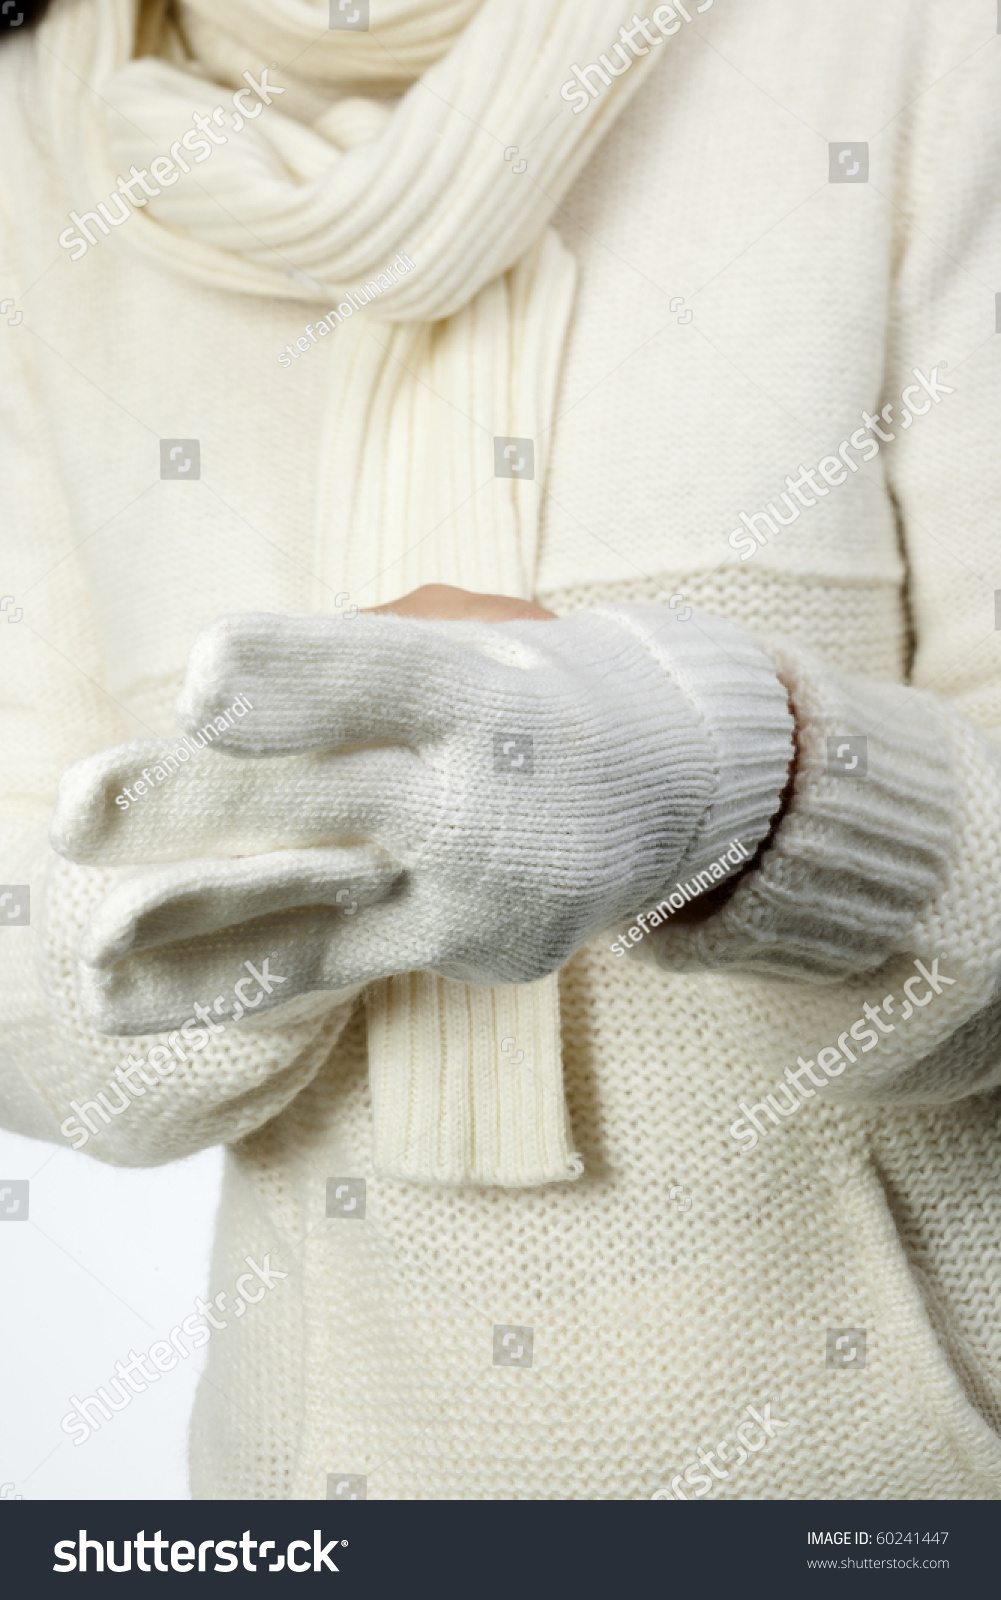 Young Woman Soft White Sweater Wearing Stock Photo 60241447 ...